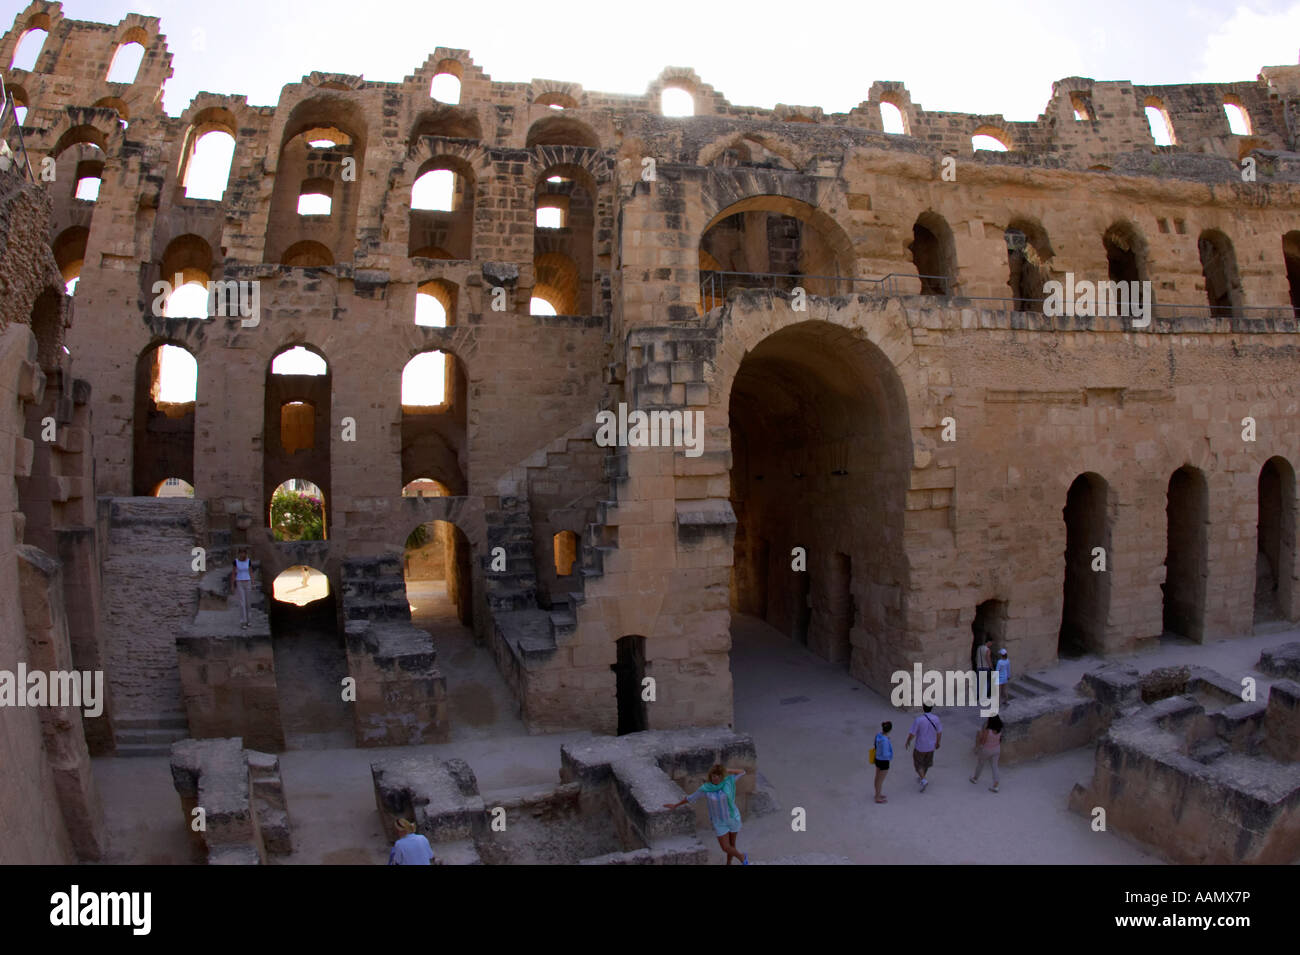 remaining arched tiers of the old roman colloseum at el jem tunisia Stock Photo